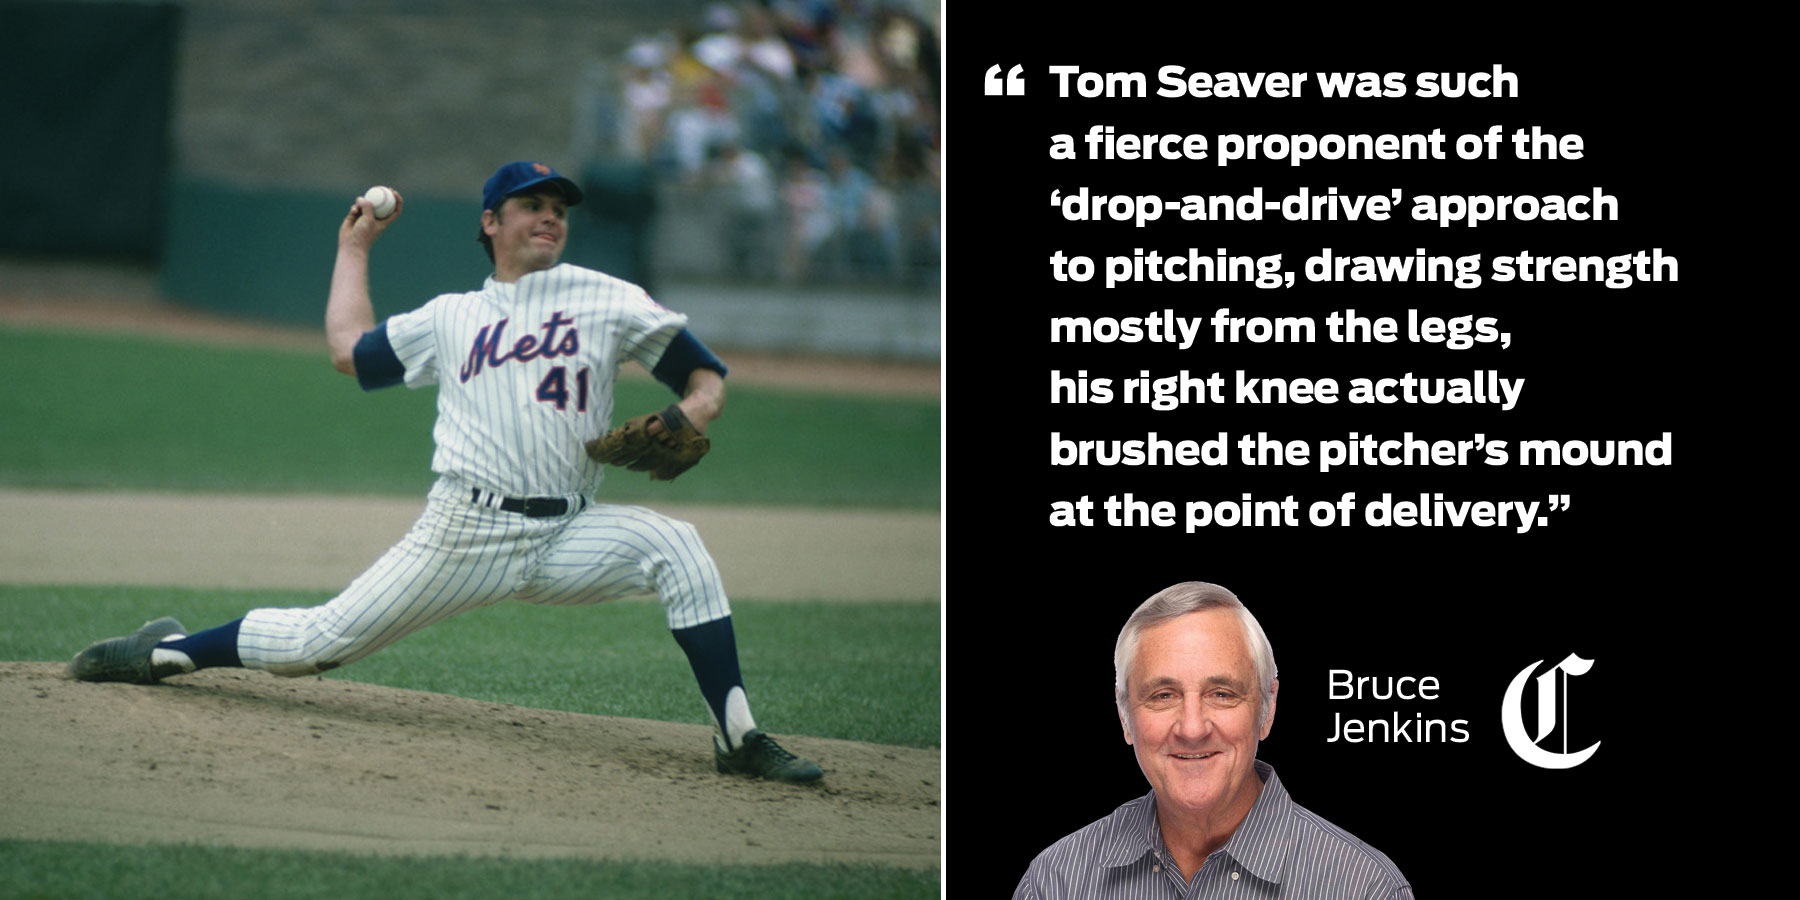 Mets: Is Tom Seaver the greatest pitcher in New York baseball history?